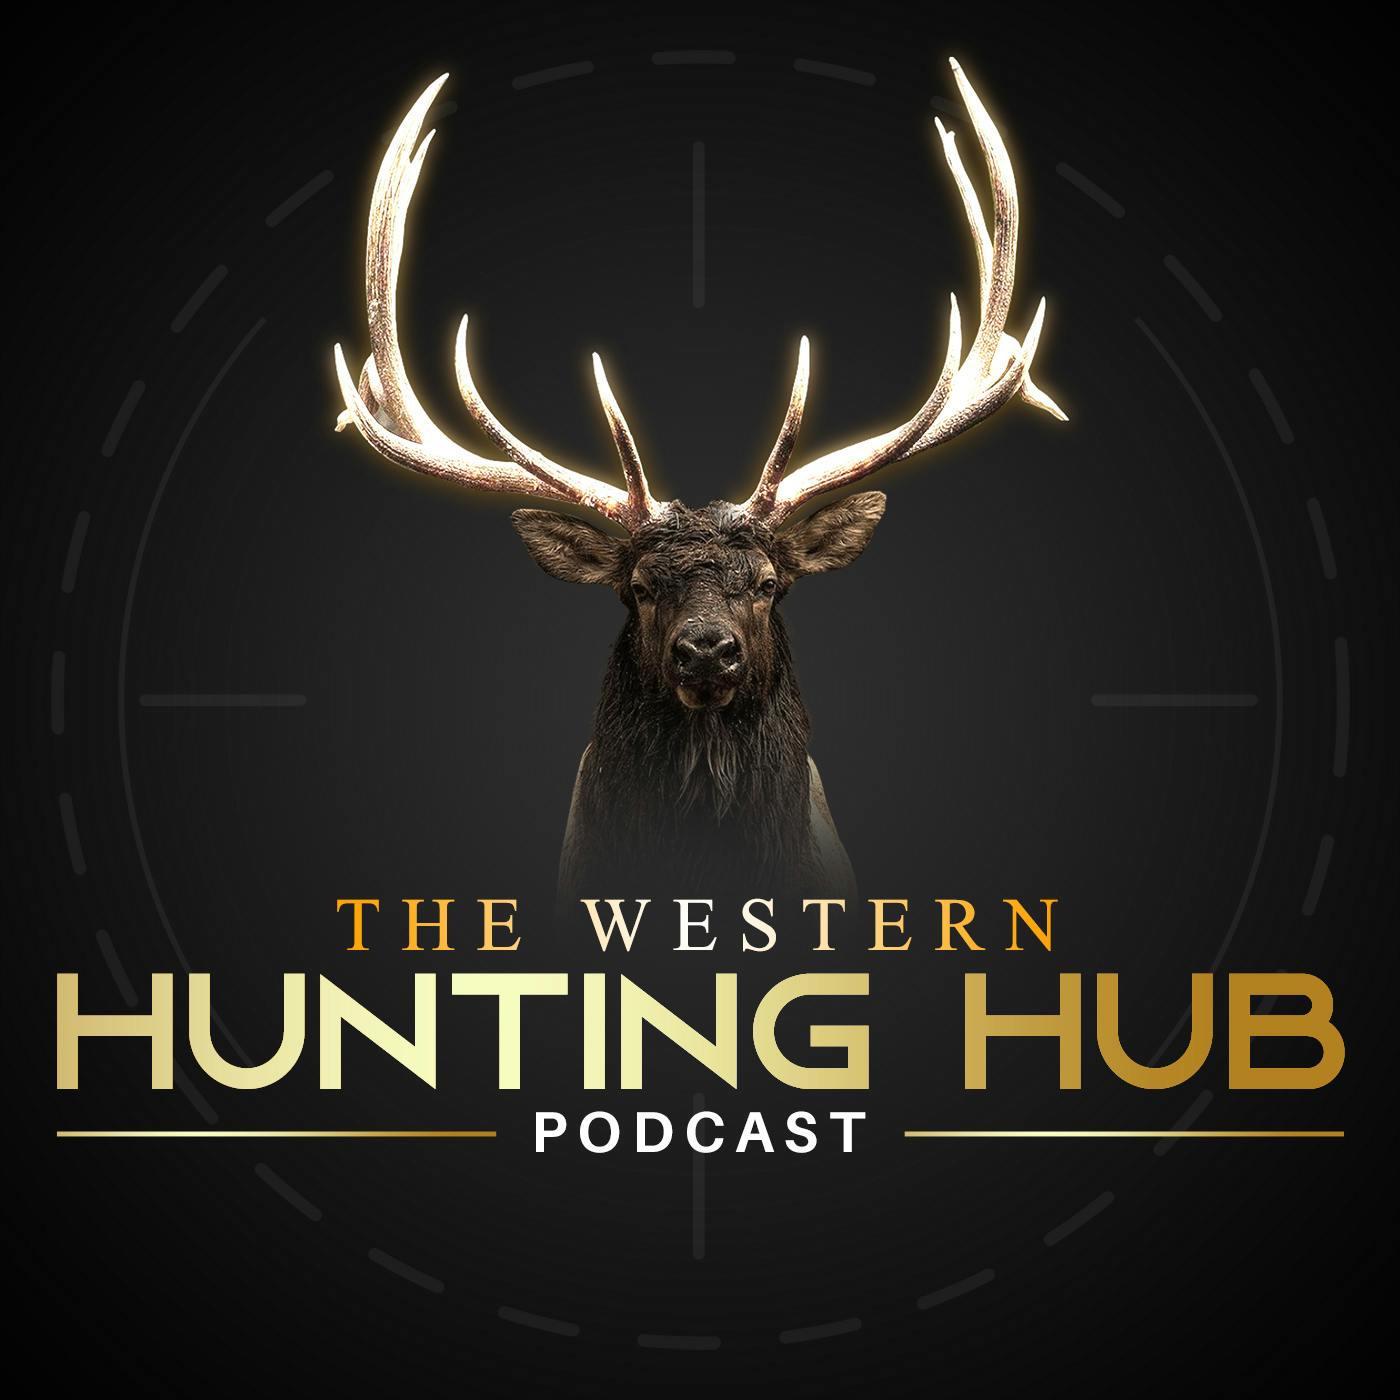 125 - How to get into hunting and wildlife biology